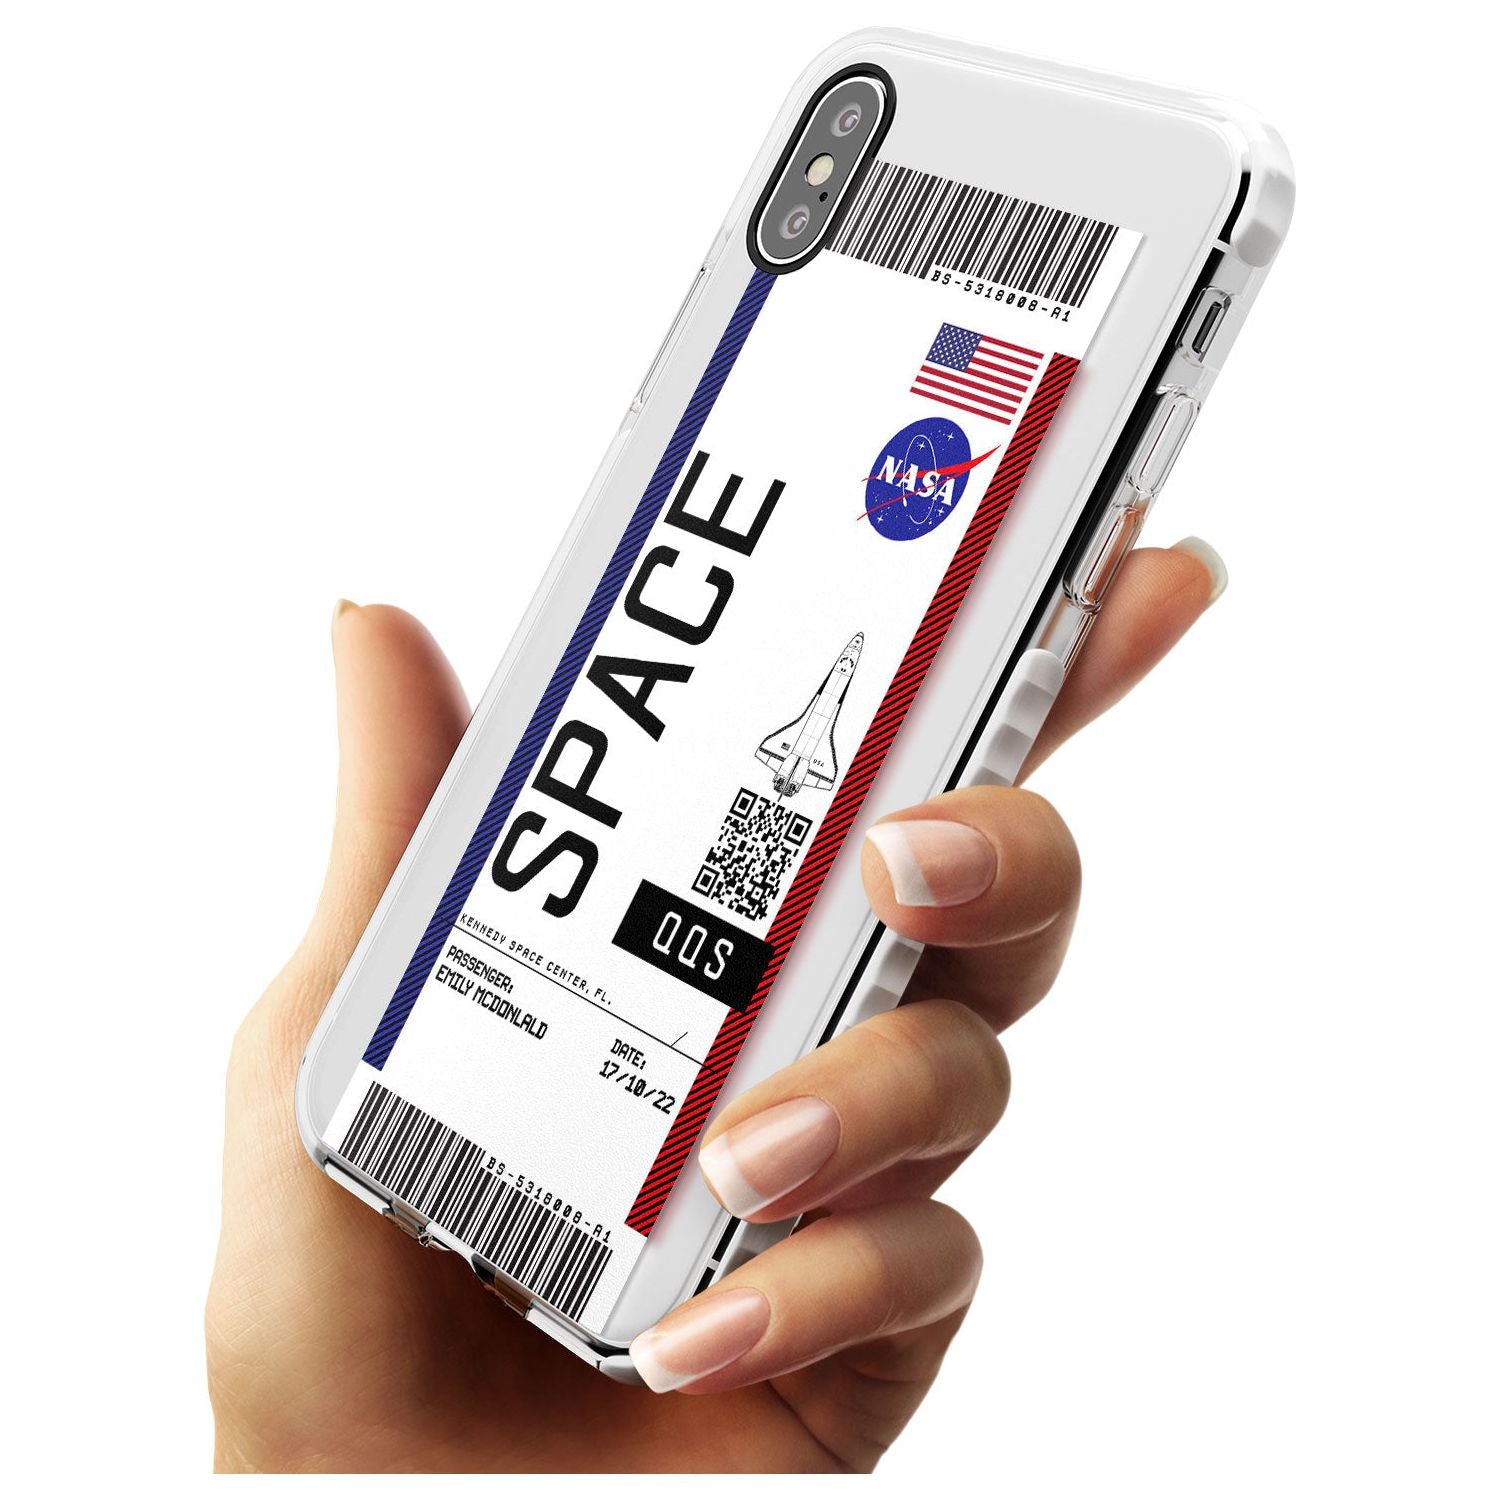 Personalised NASA Boarding Pass (Light) Impact Phone Case for iPhone X XS Max XR